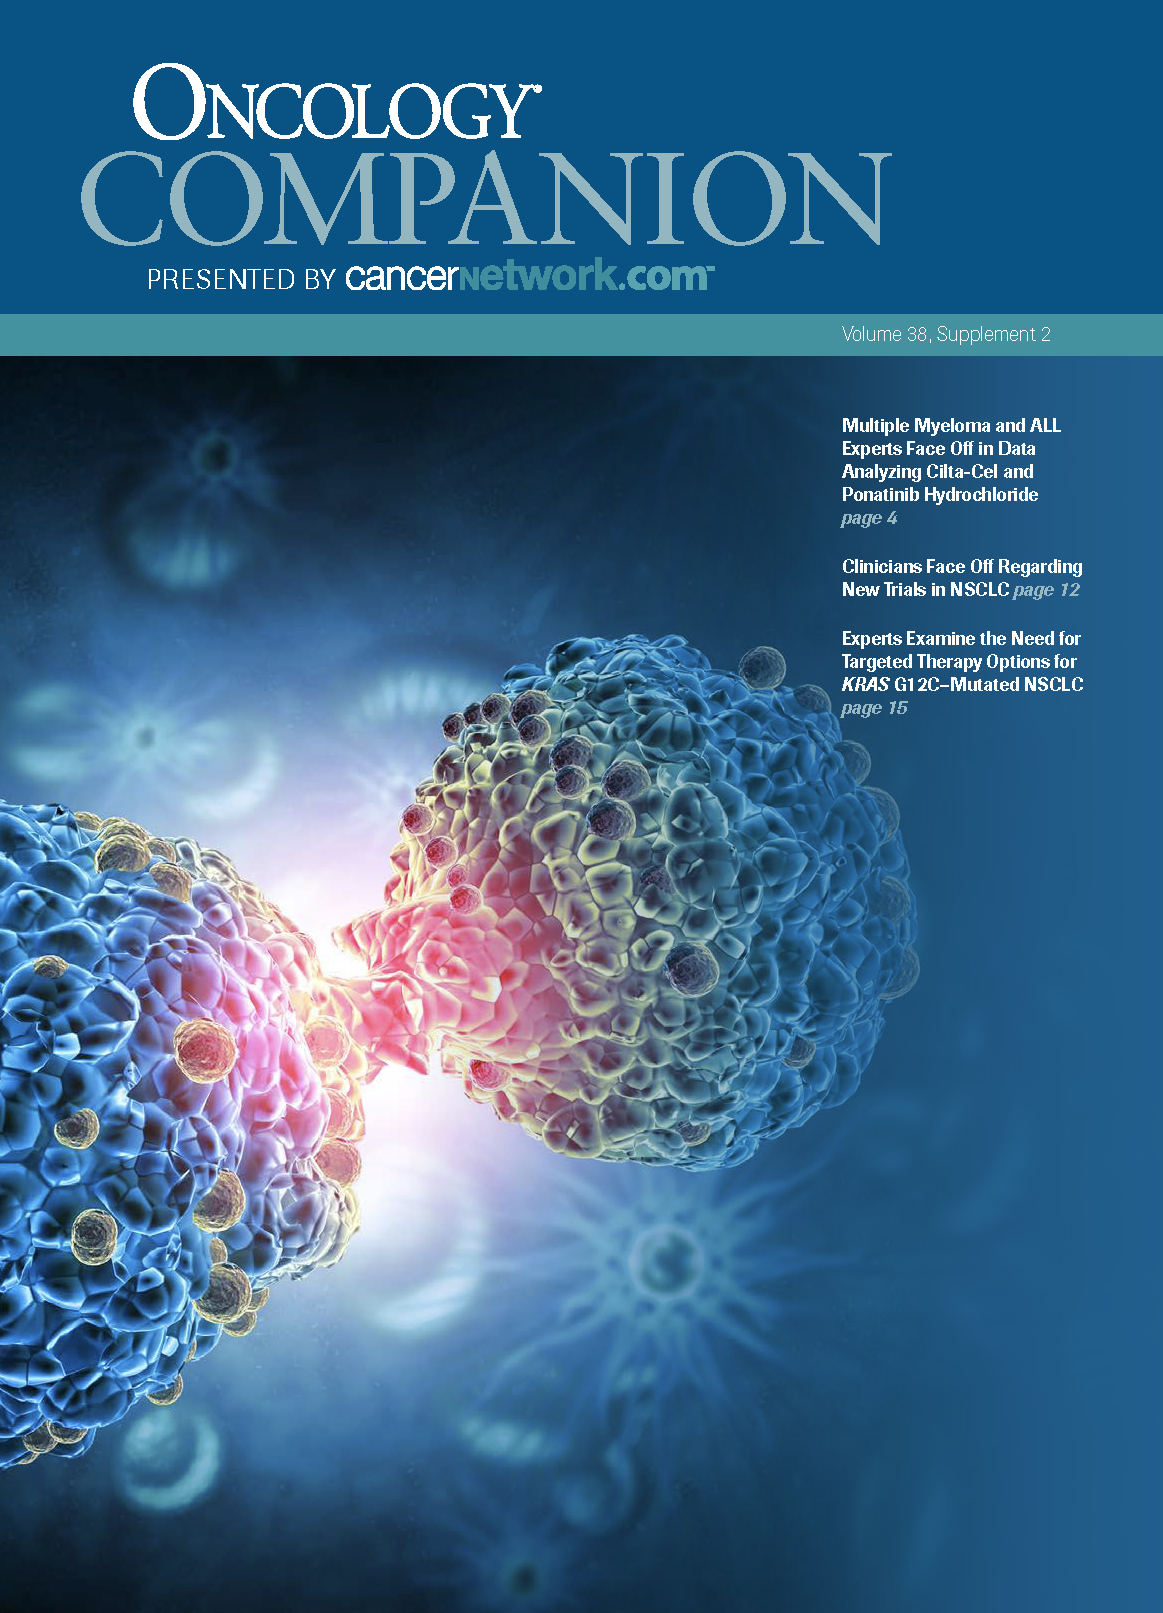 ONCOLOGY® Companion, Volume 38, Supplement 2